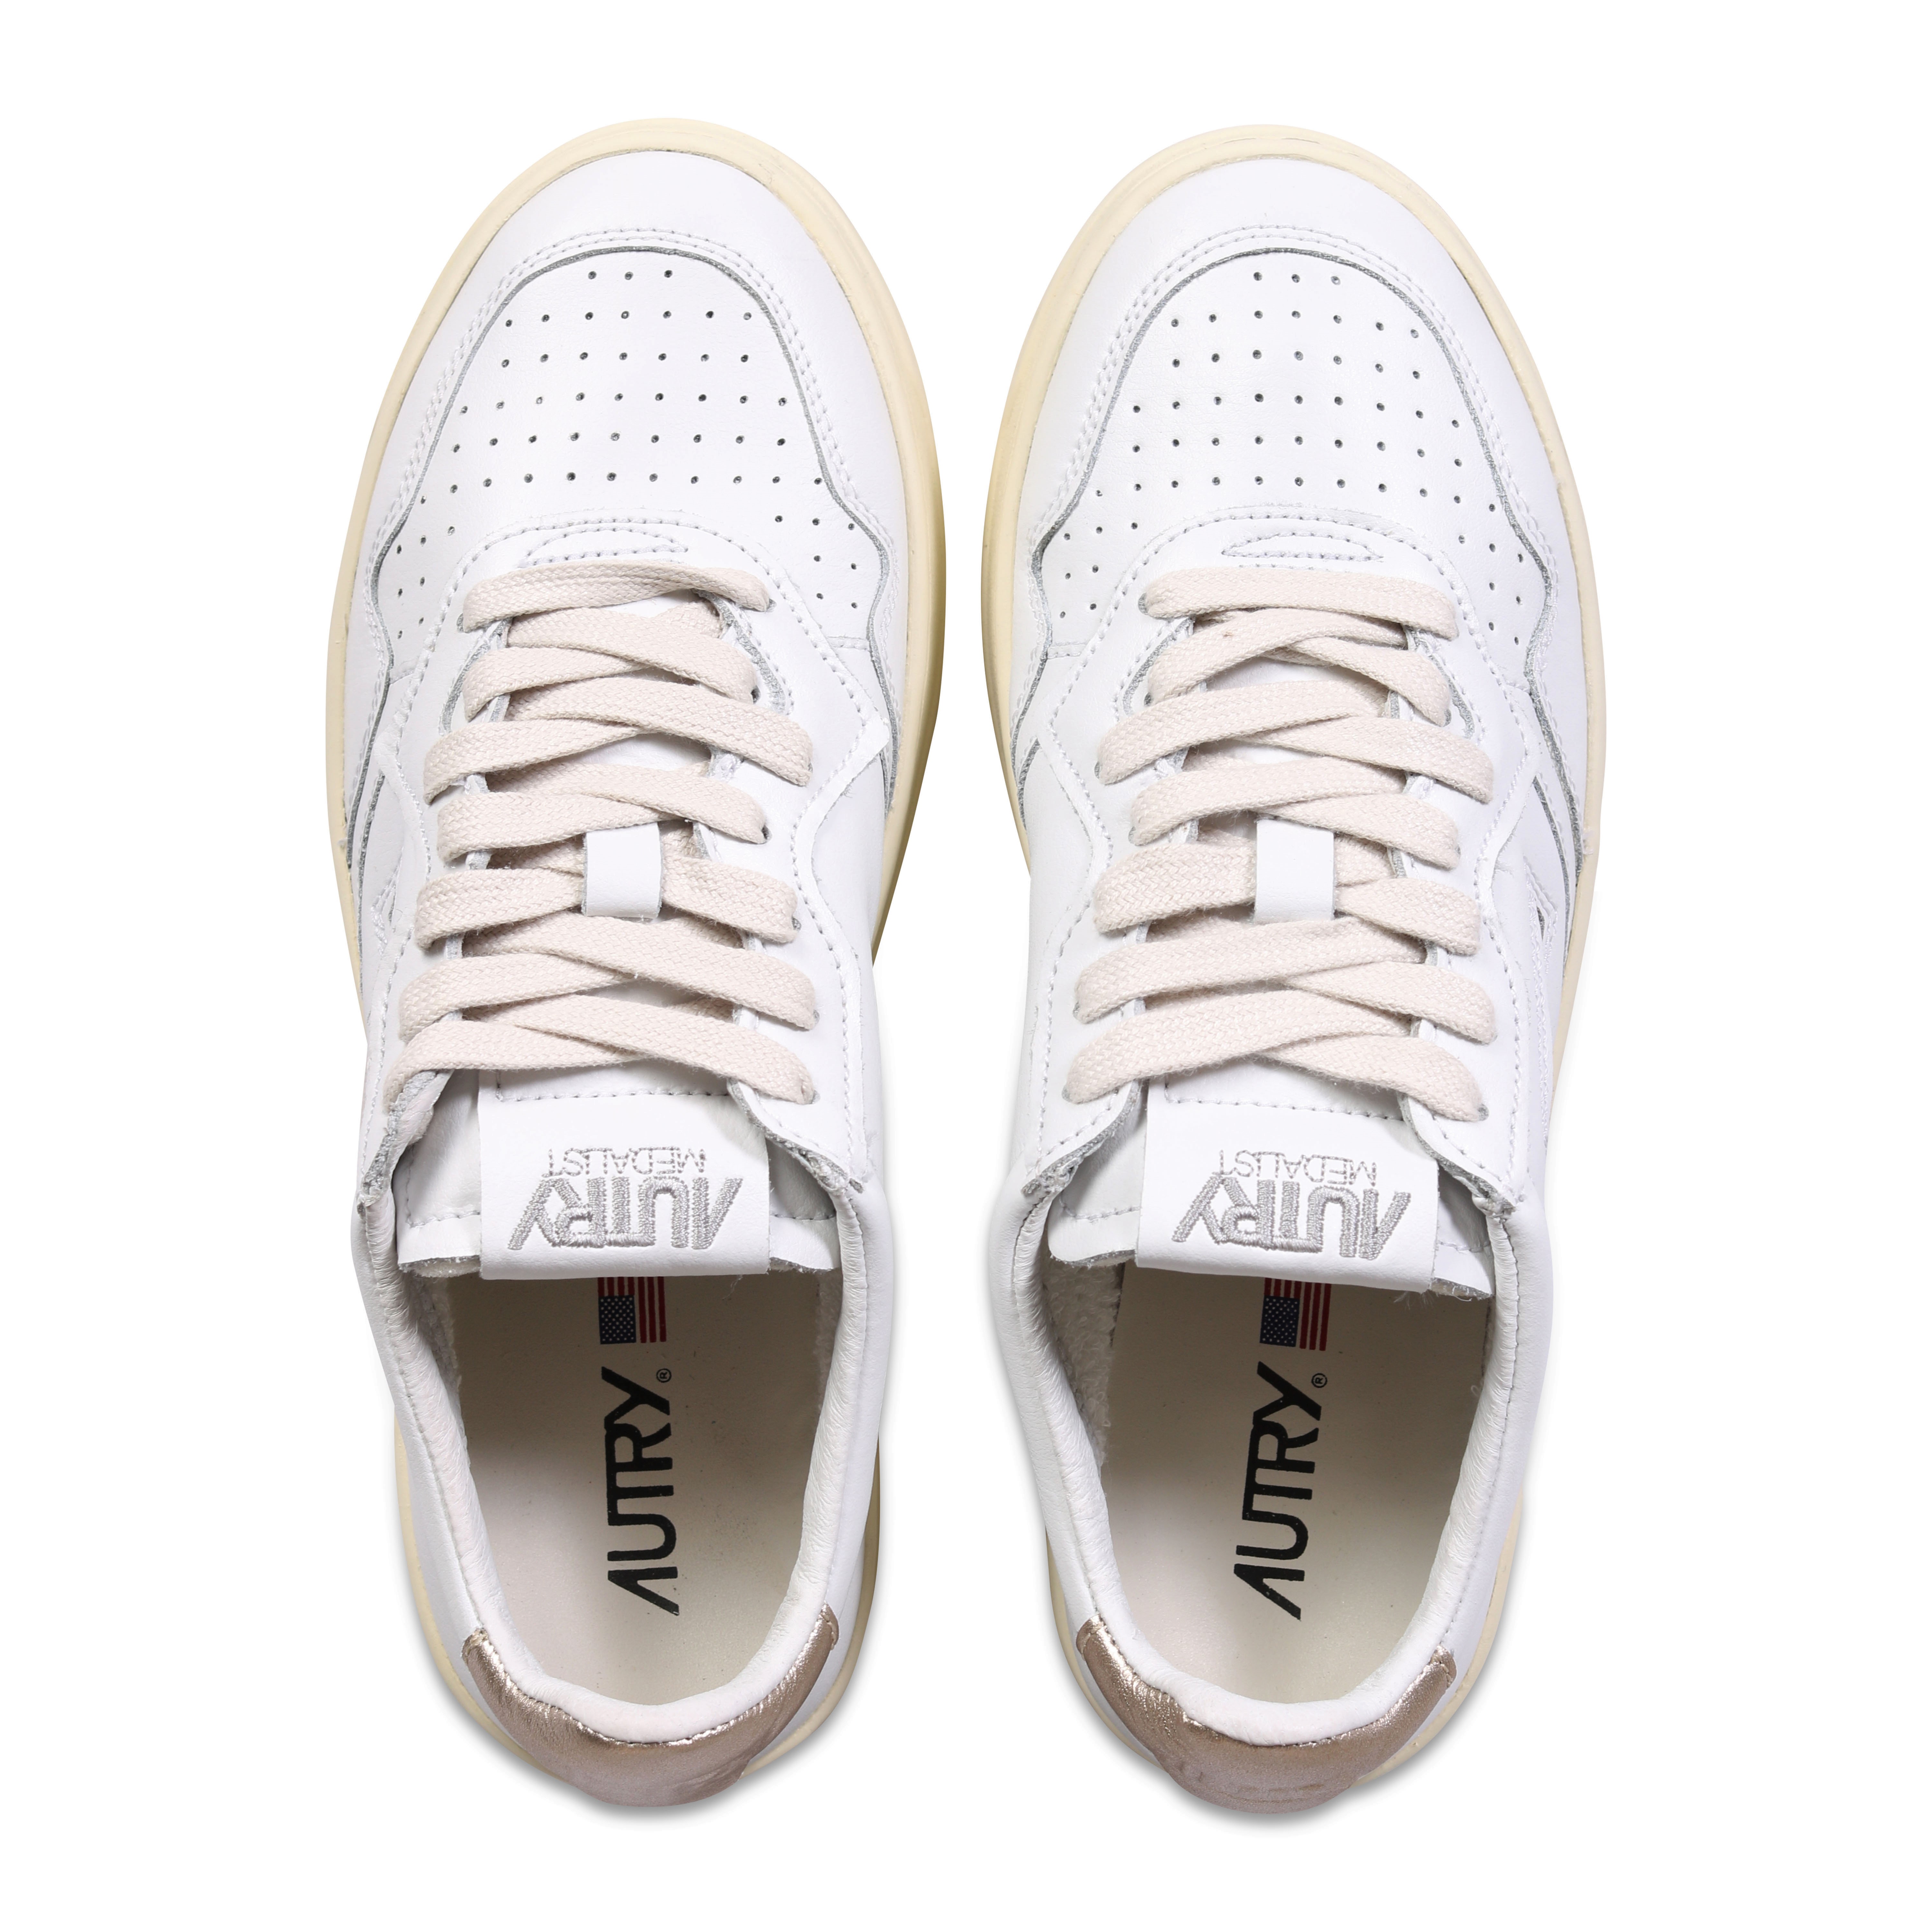 Autry Action Shoes Low Sneaker  in White/Gold